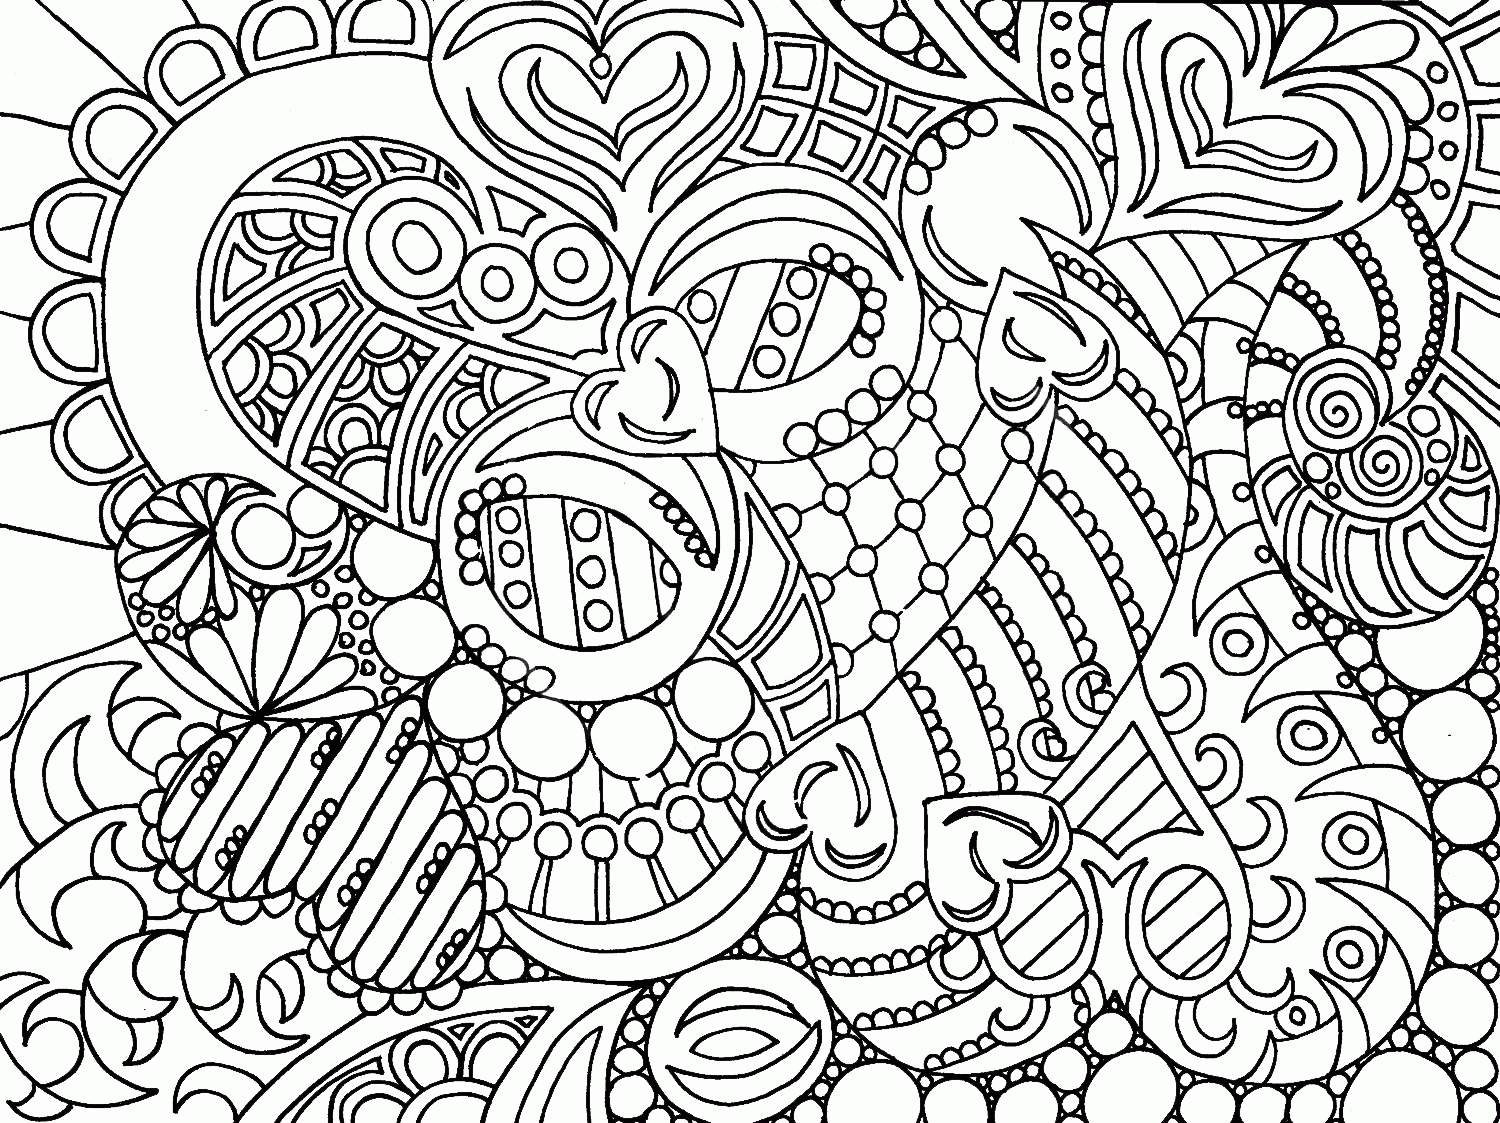 Download Free Printable Coloring Pages For Adults   Coloring Home